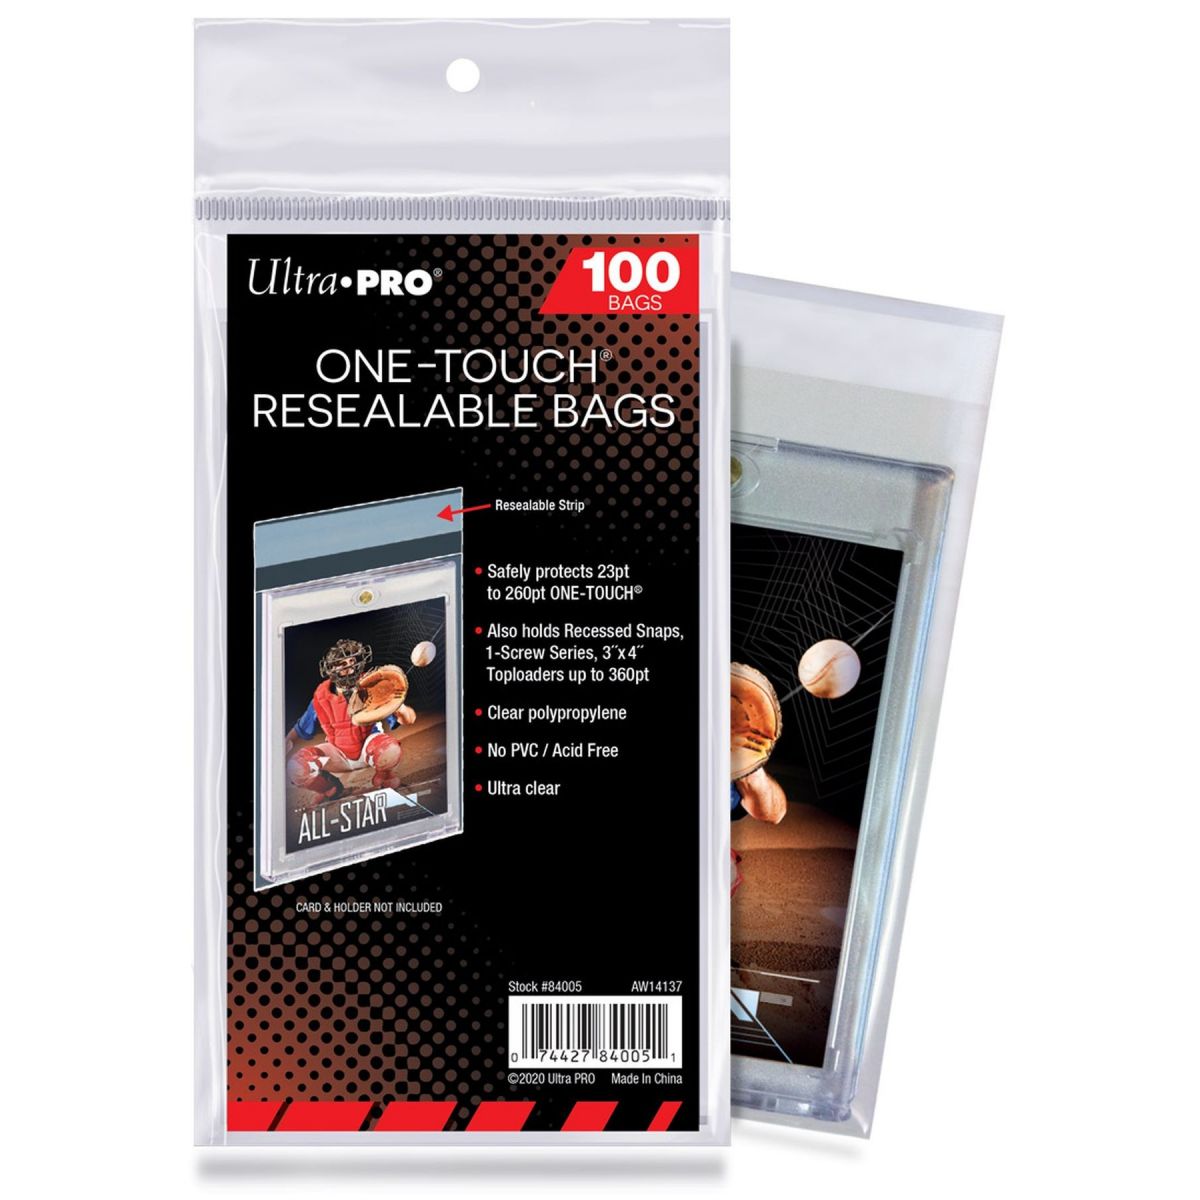 Item Ultra Pro - Team Bags - One-Touch Resealable Bag - Protège-cartes One-Touch Refermables (100)